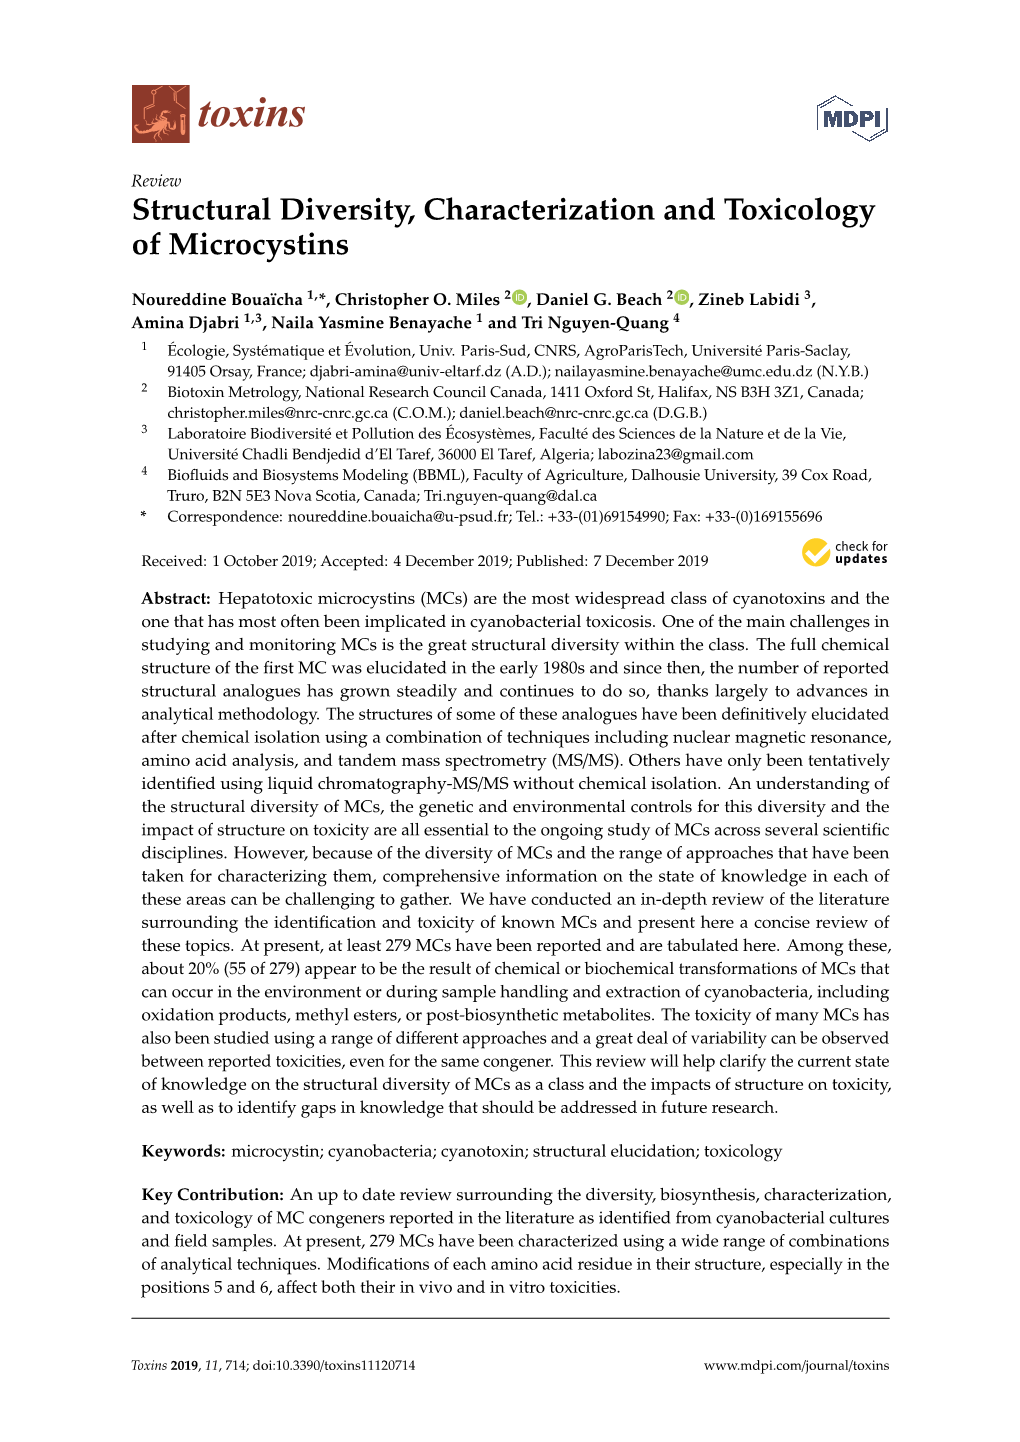 Structural Diversity, Characterization and Toxicology of Microcystins